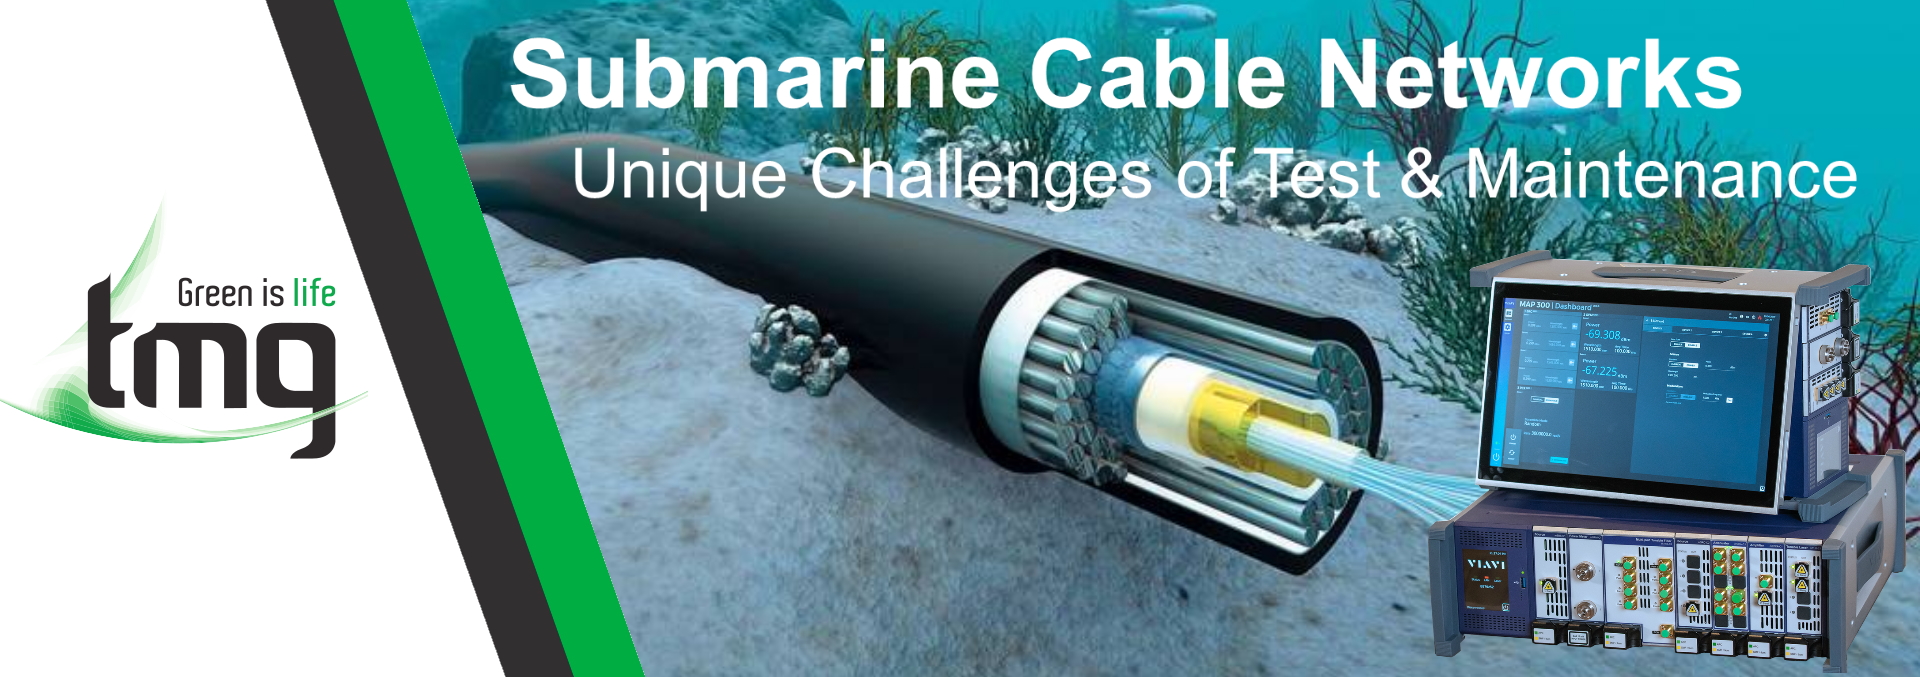 Submarine Cable Networks